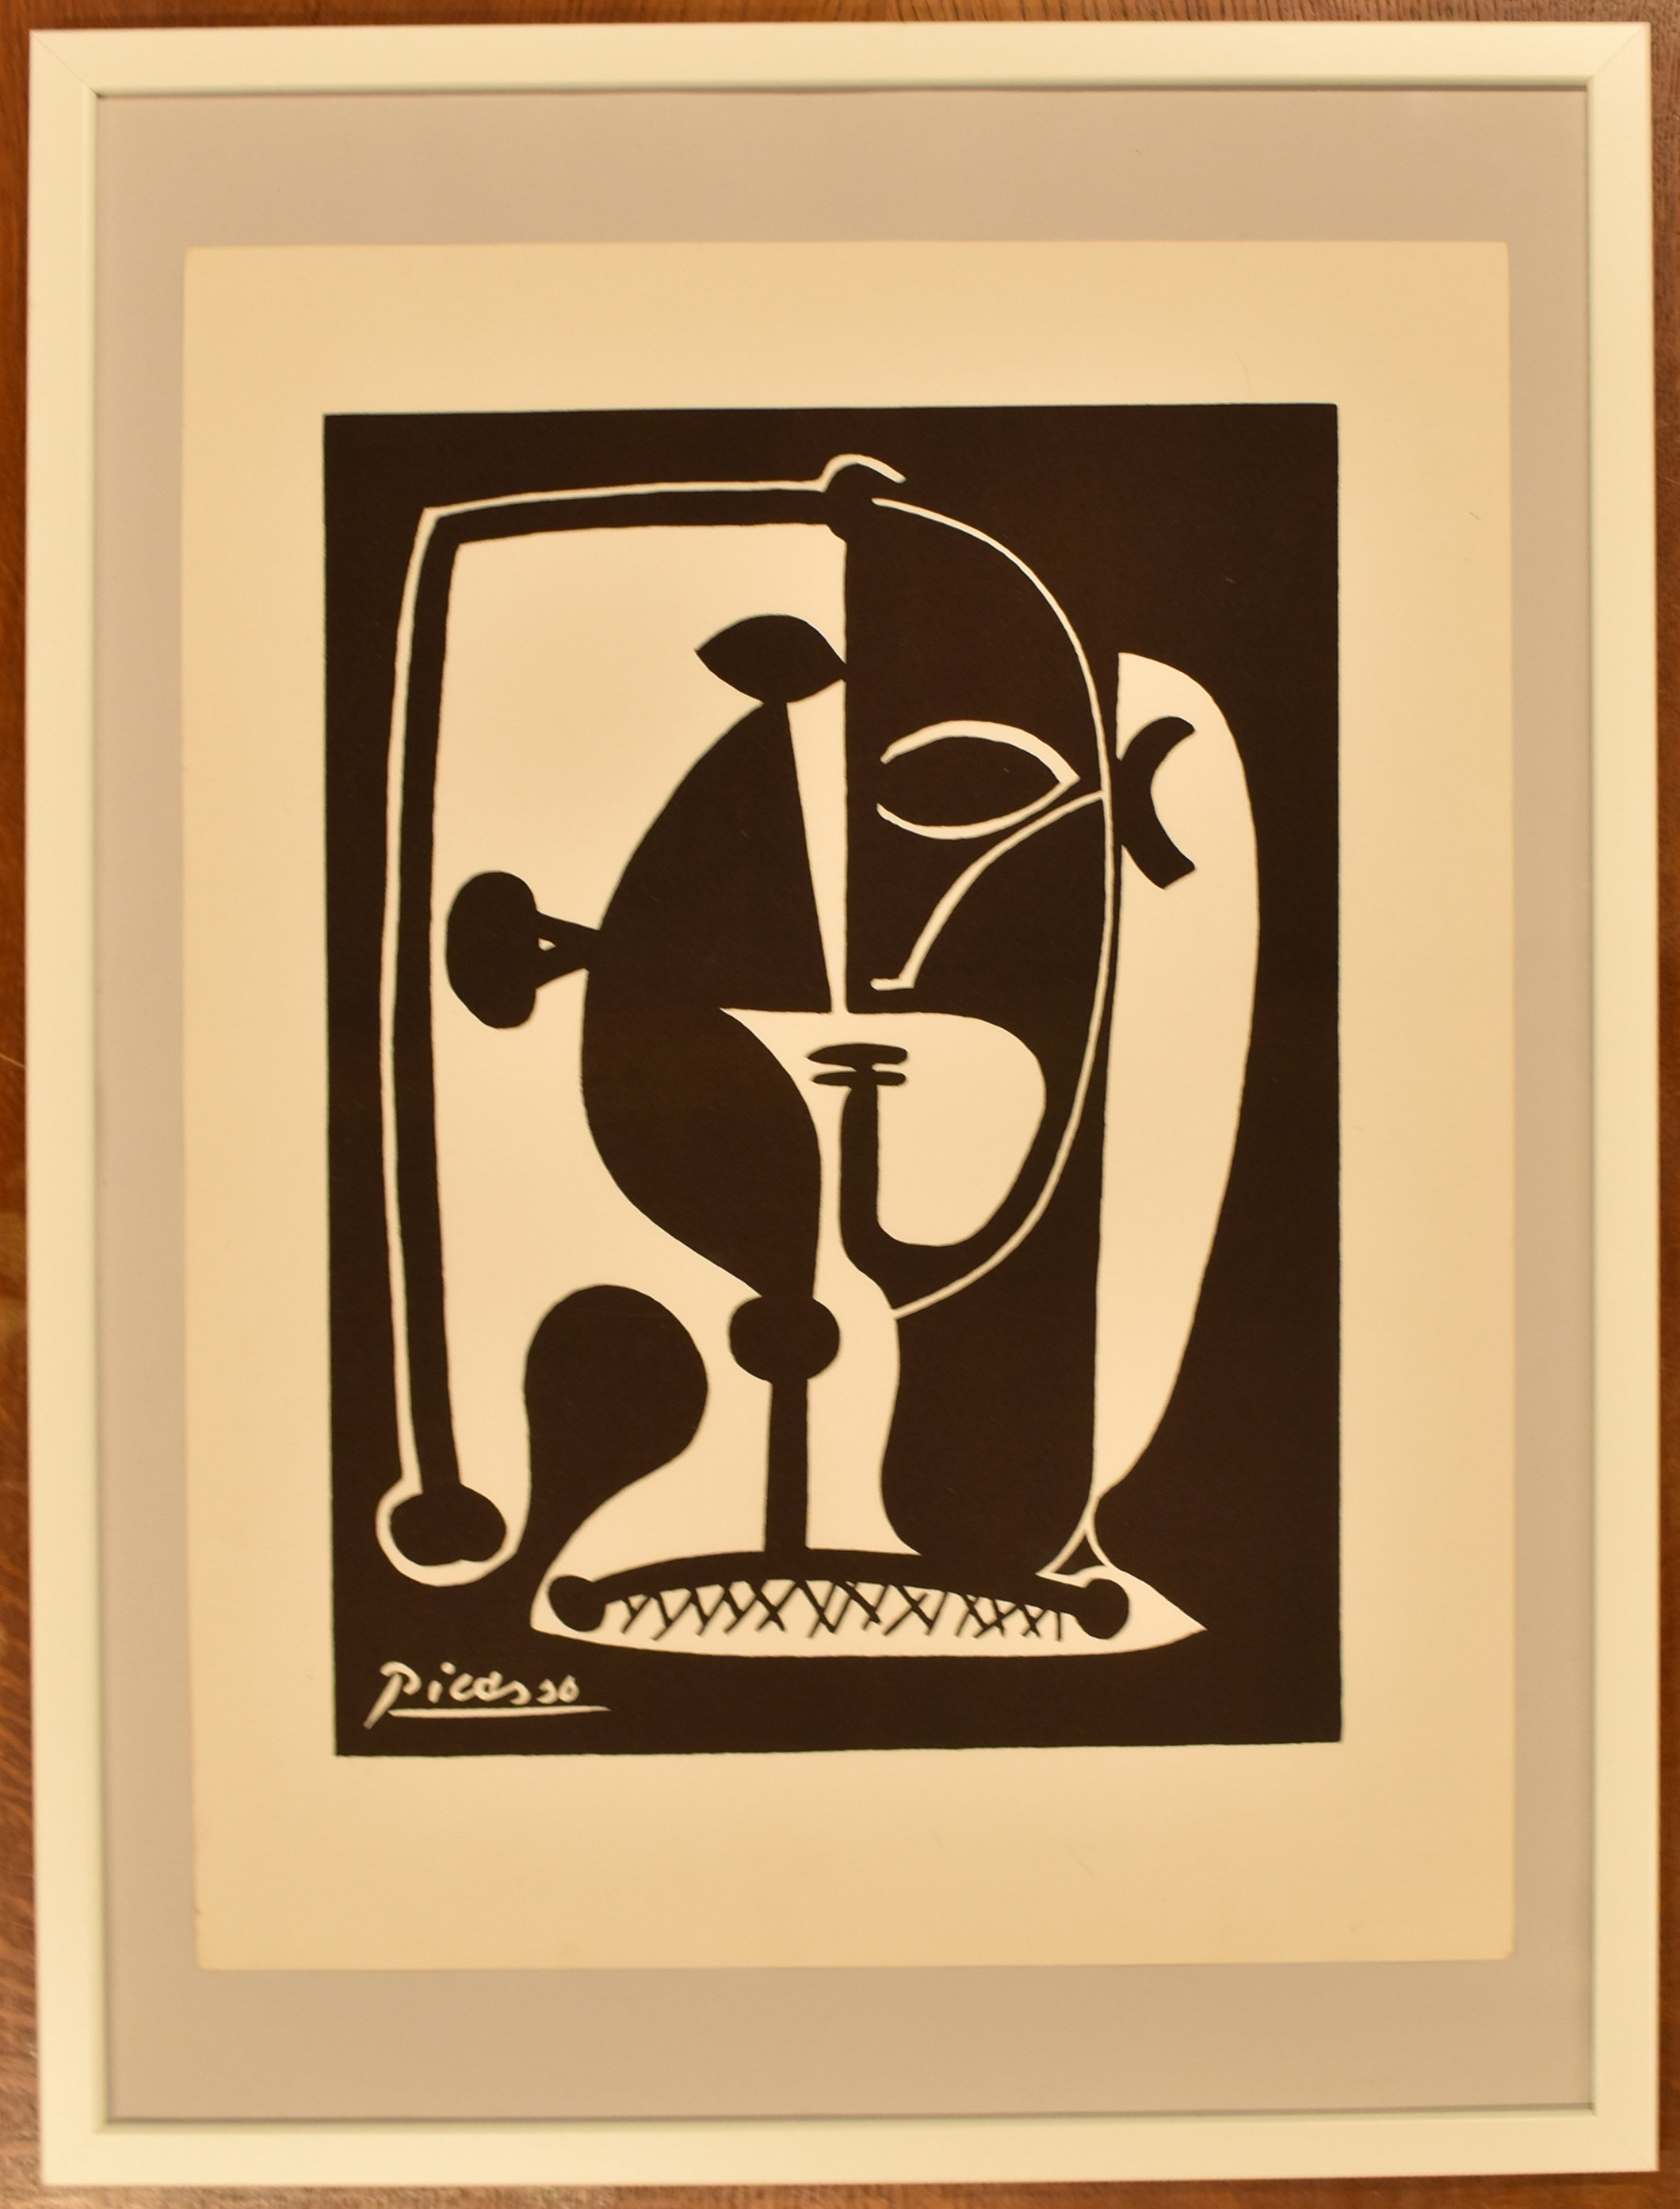 PABLO PICASSO - FIGURE 1948 - LITHOGRAPH ON PAPER - Image 2 of 4